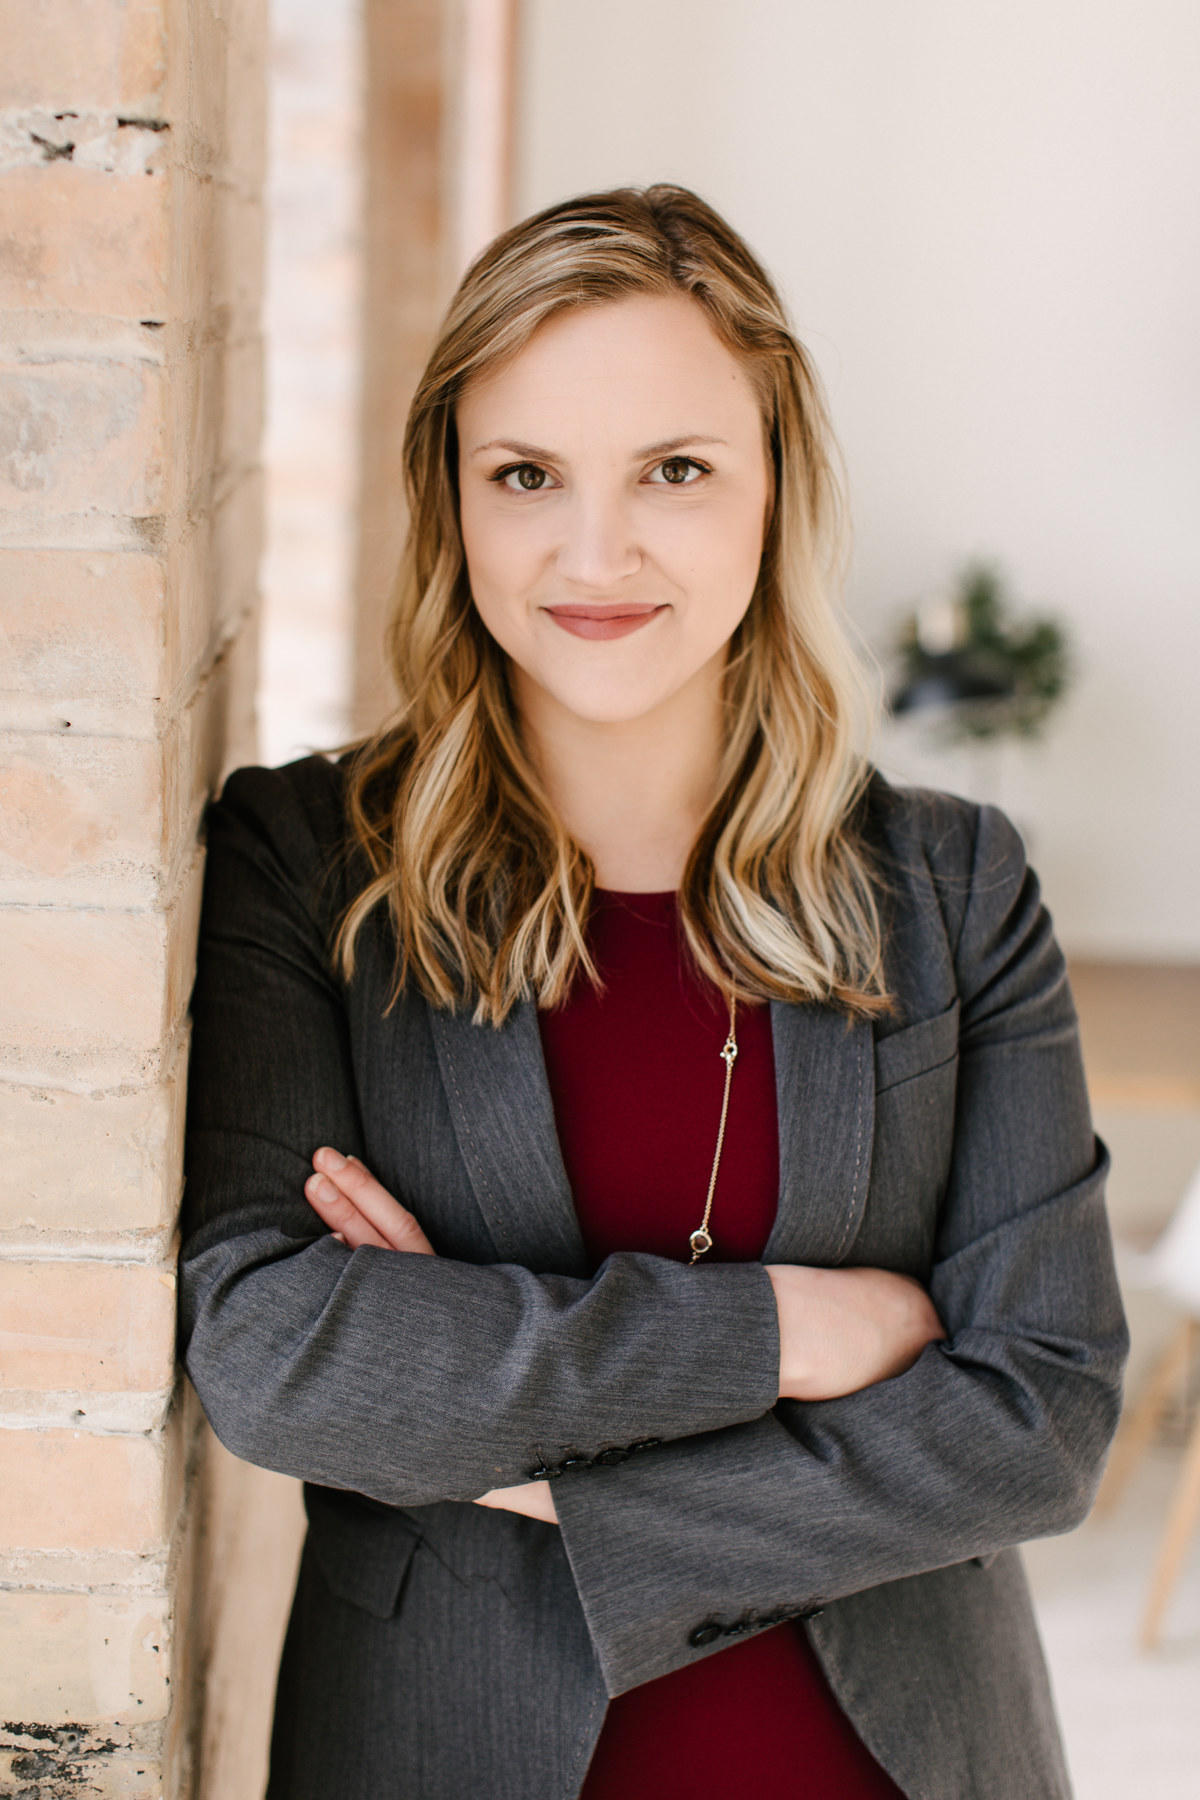 Lindsay Lien firmly believes in the power of working smarter and harder in tandem. Her dedication stems from a genuine care for her clients, compelling her to strive for excellence in both efficiency and effort.